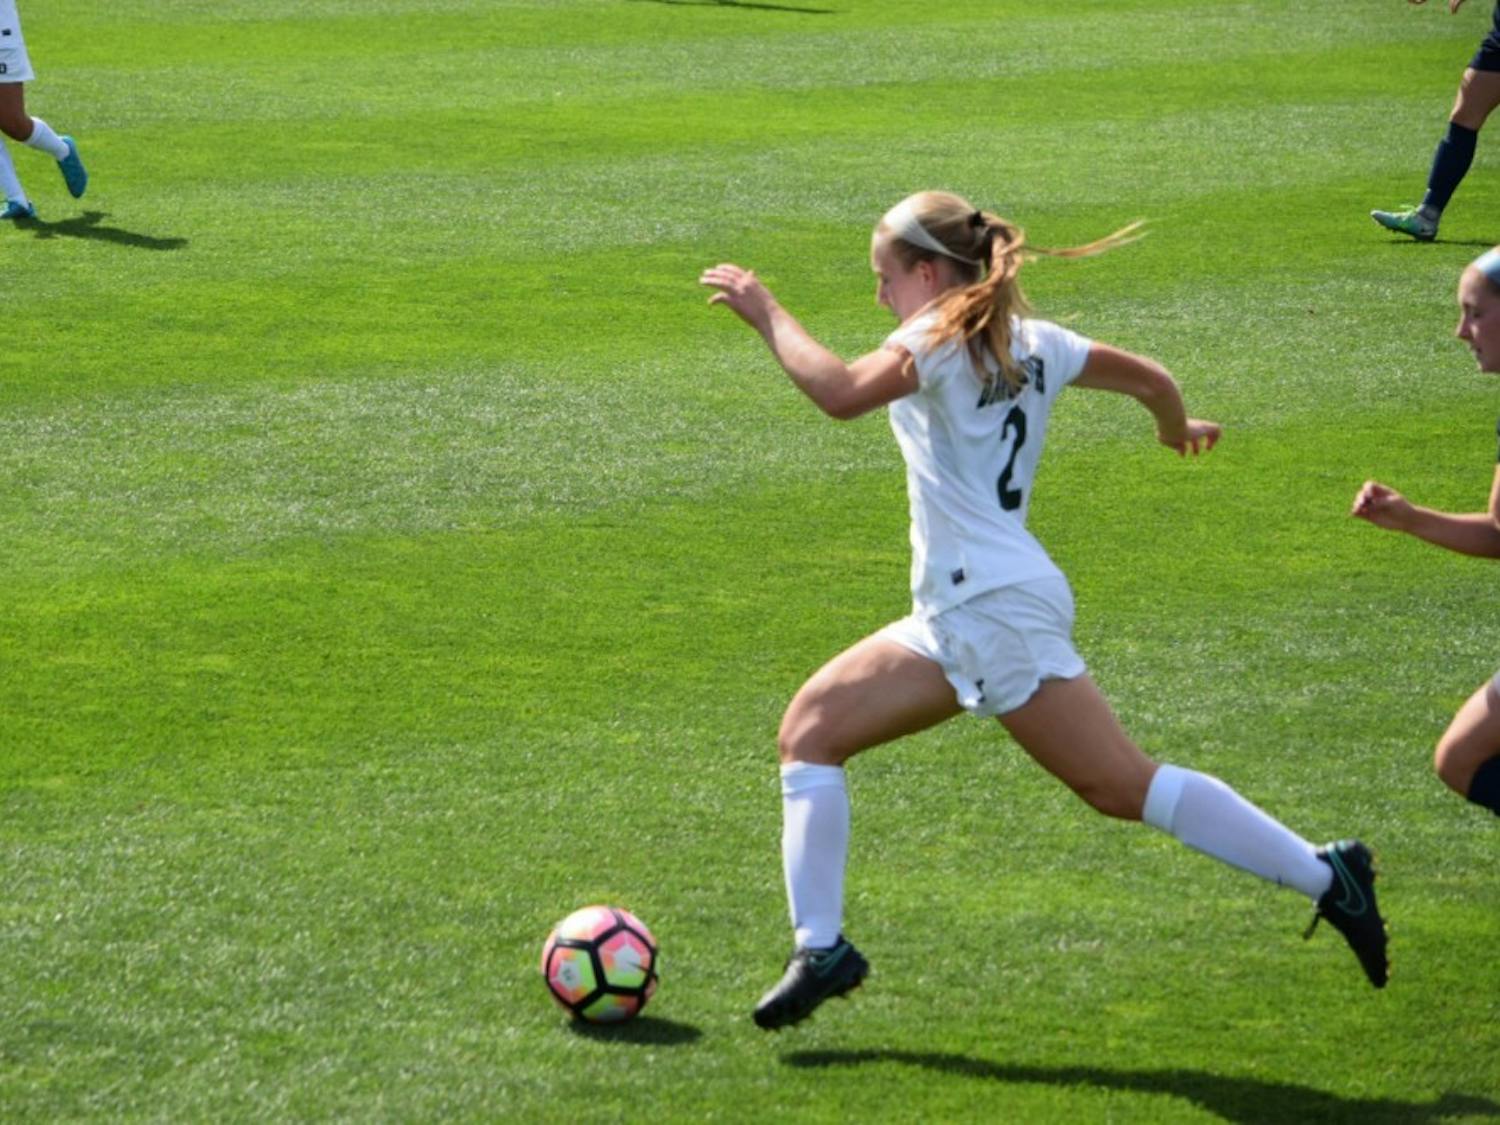 The Women's Soccer team tied Columbia 0-0 on Saturday.